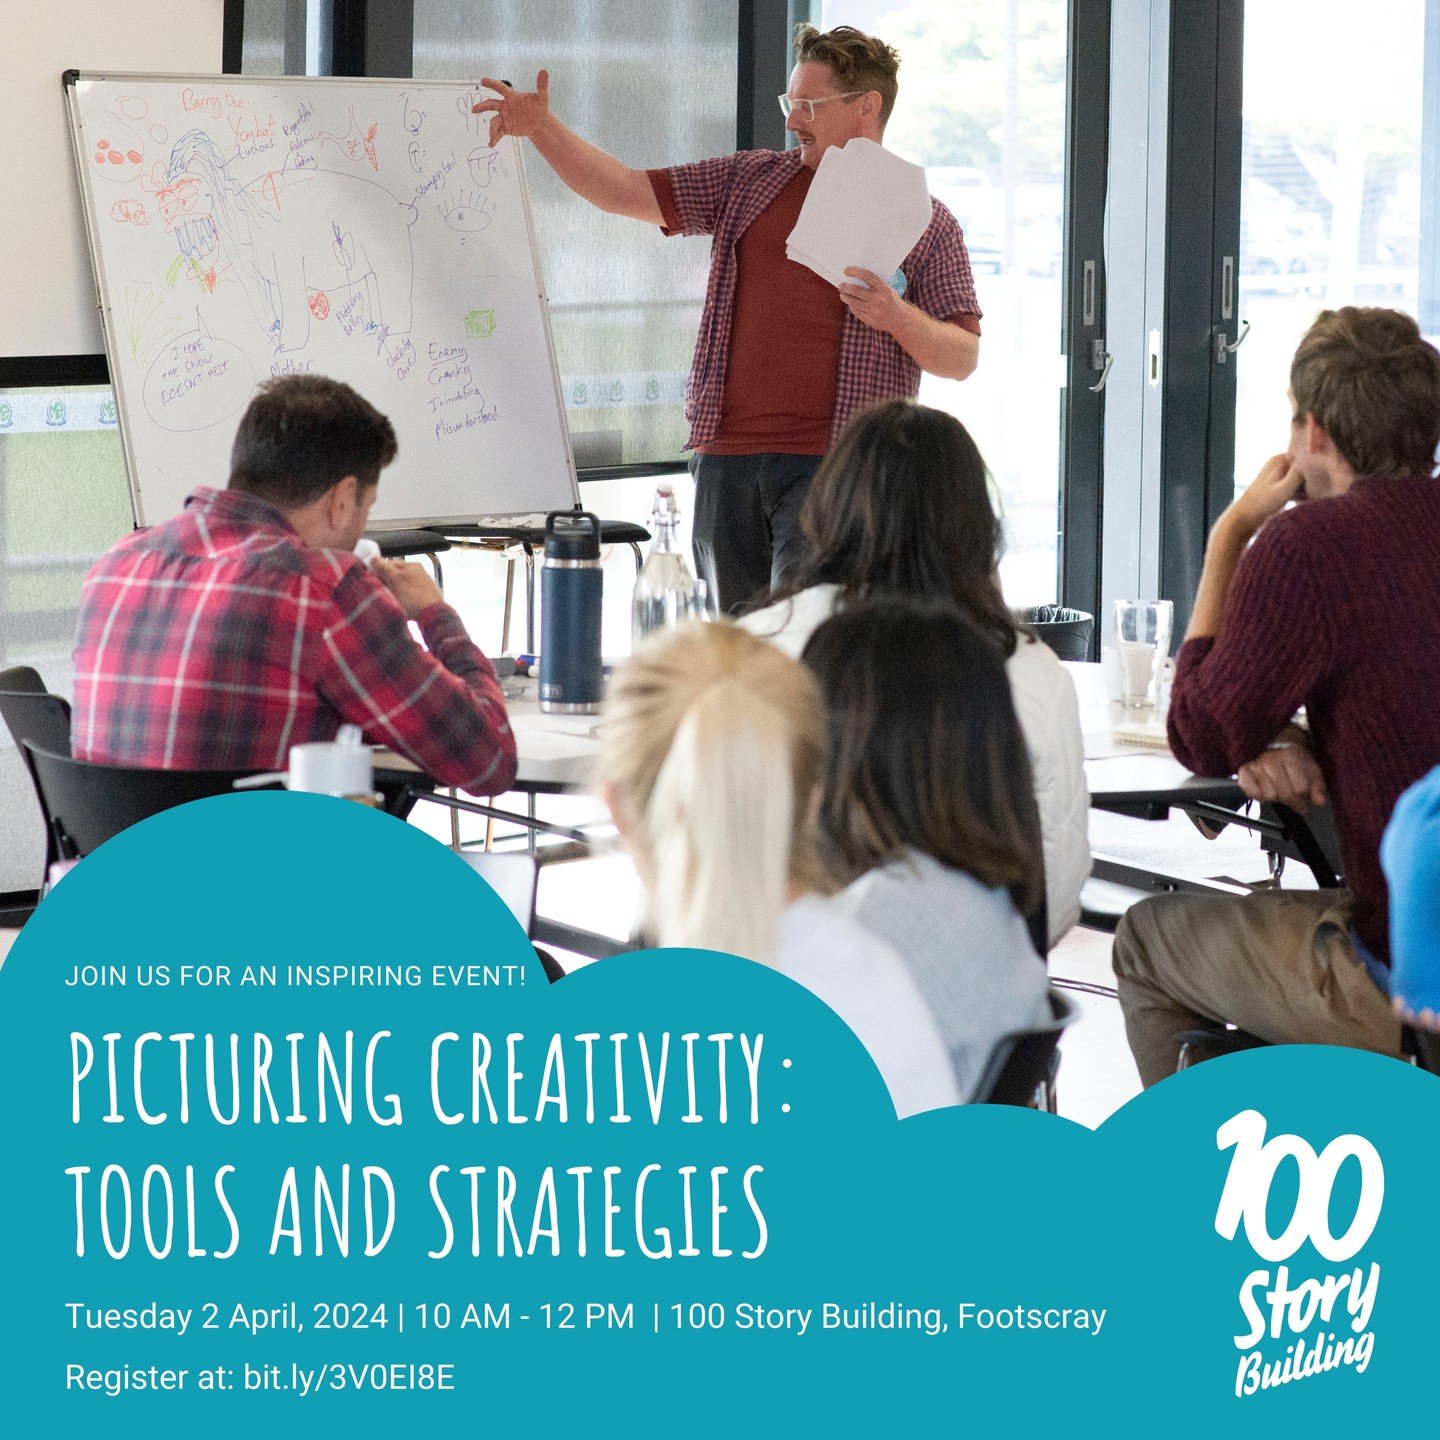 Looking to refresh your teaching practice with a splash of creativity?

We're running a free teacher professional development workshop these school holidays! Get some creative tools, tricks and strategies for your classroom, plus some insight into th